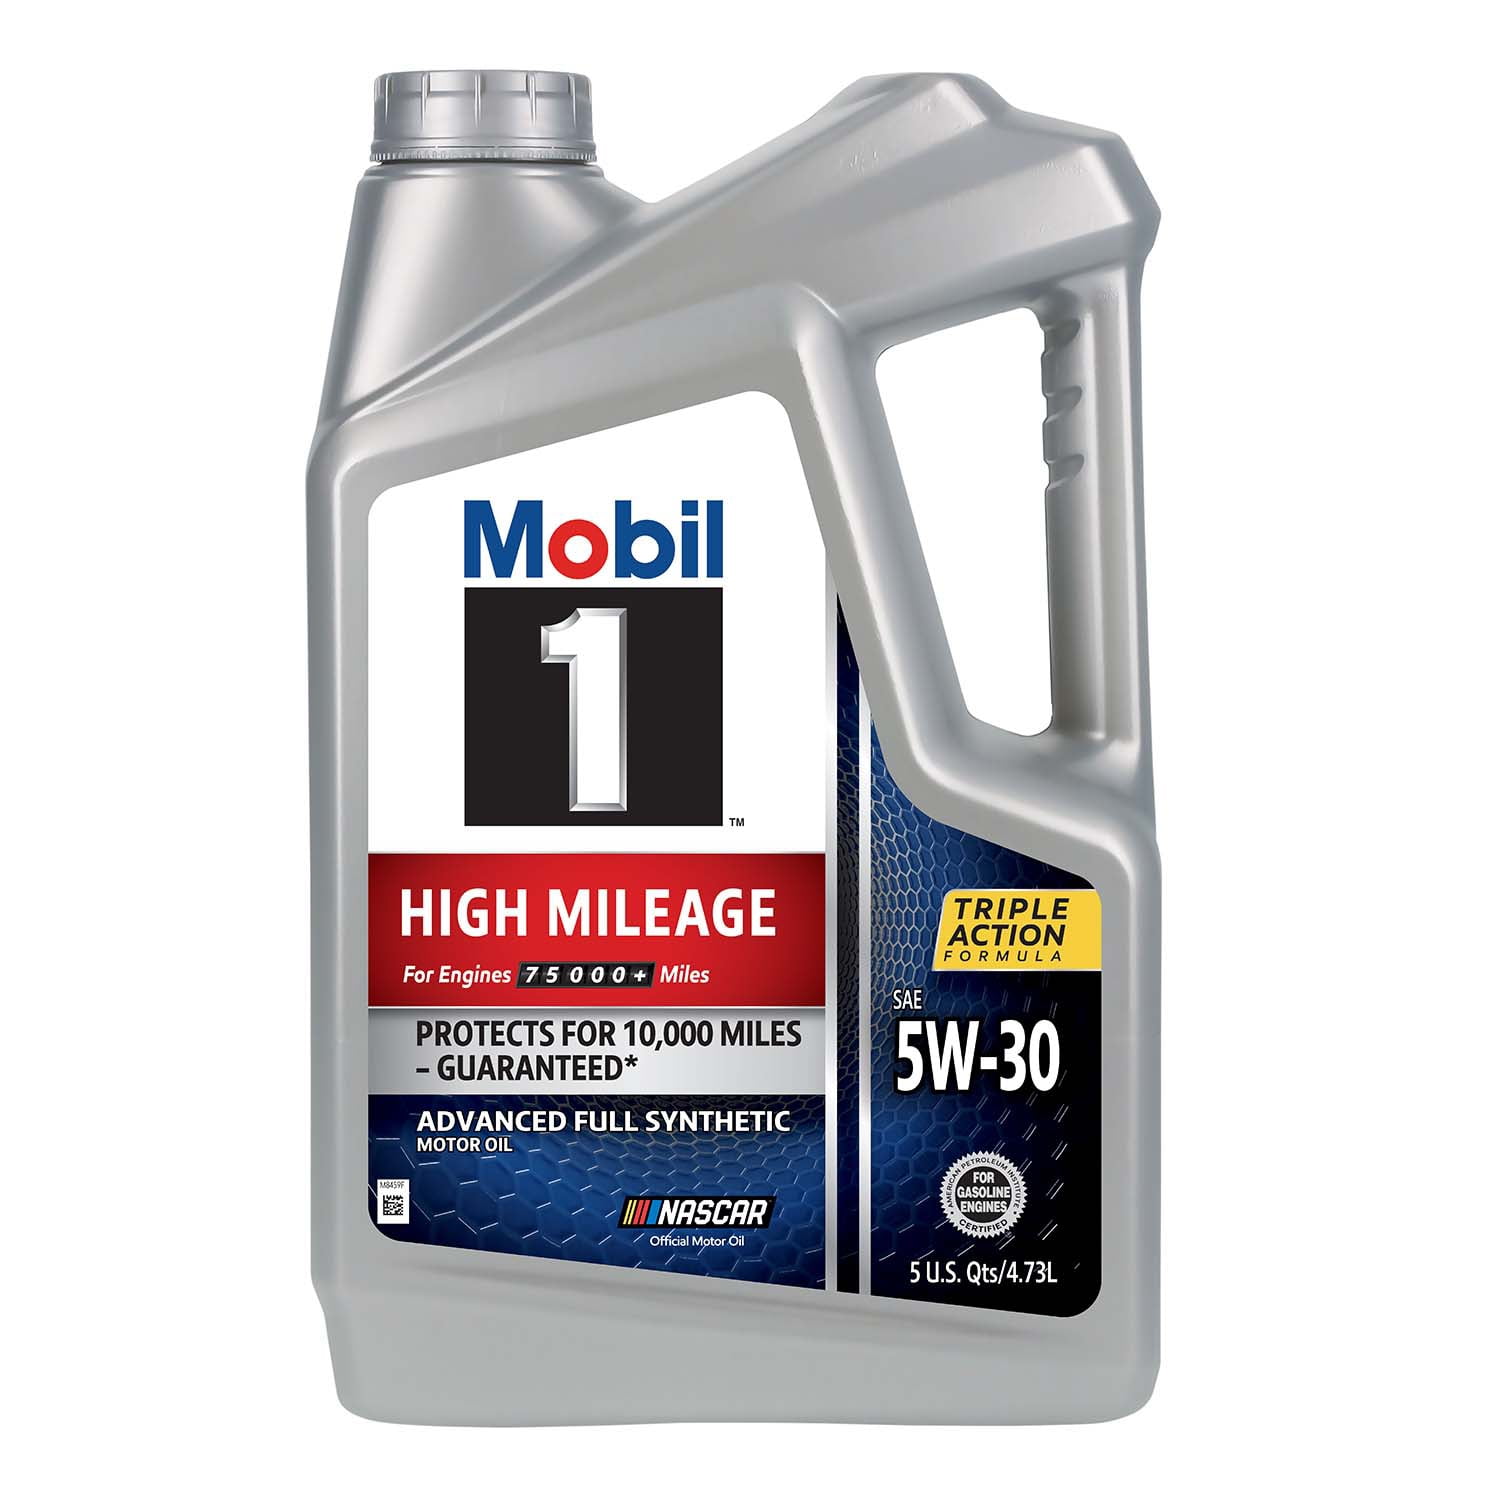 Mobil 1 High Mileage Full Synthetic Motor Oil 5W-30, 5 qt (3 Pack) - 2